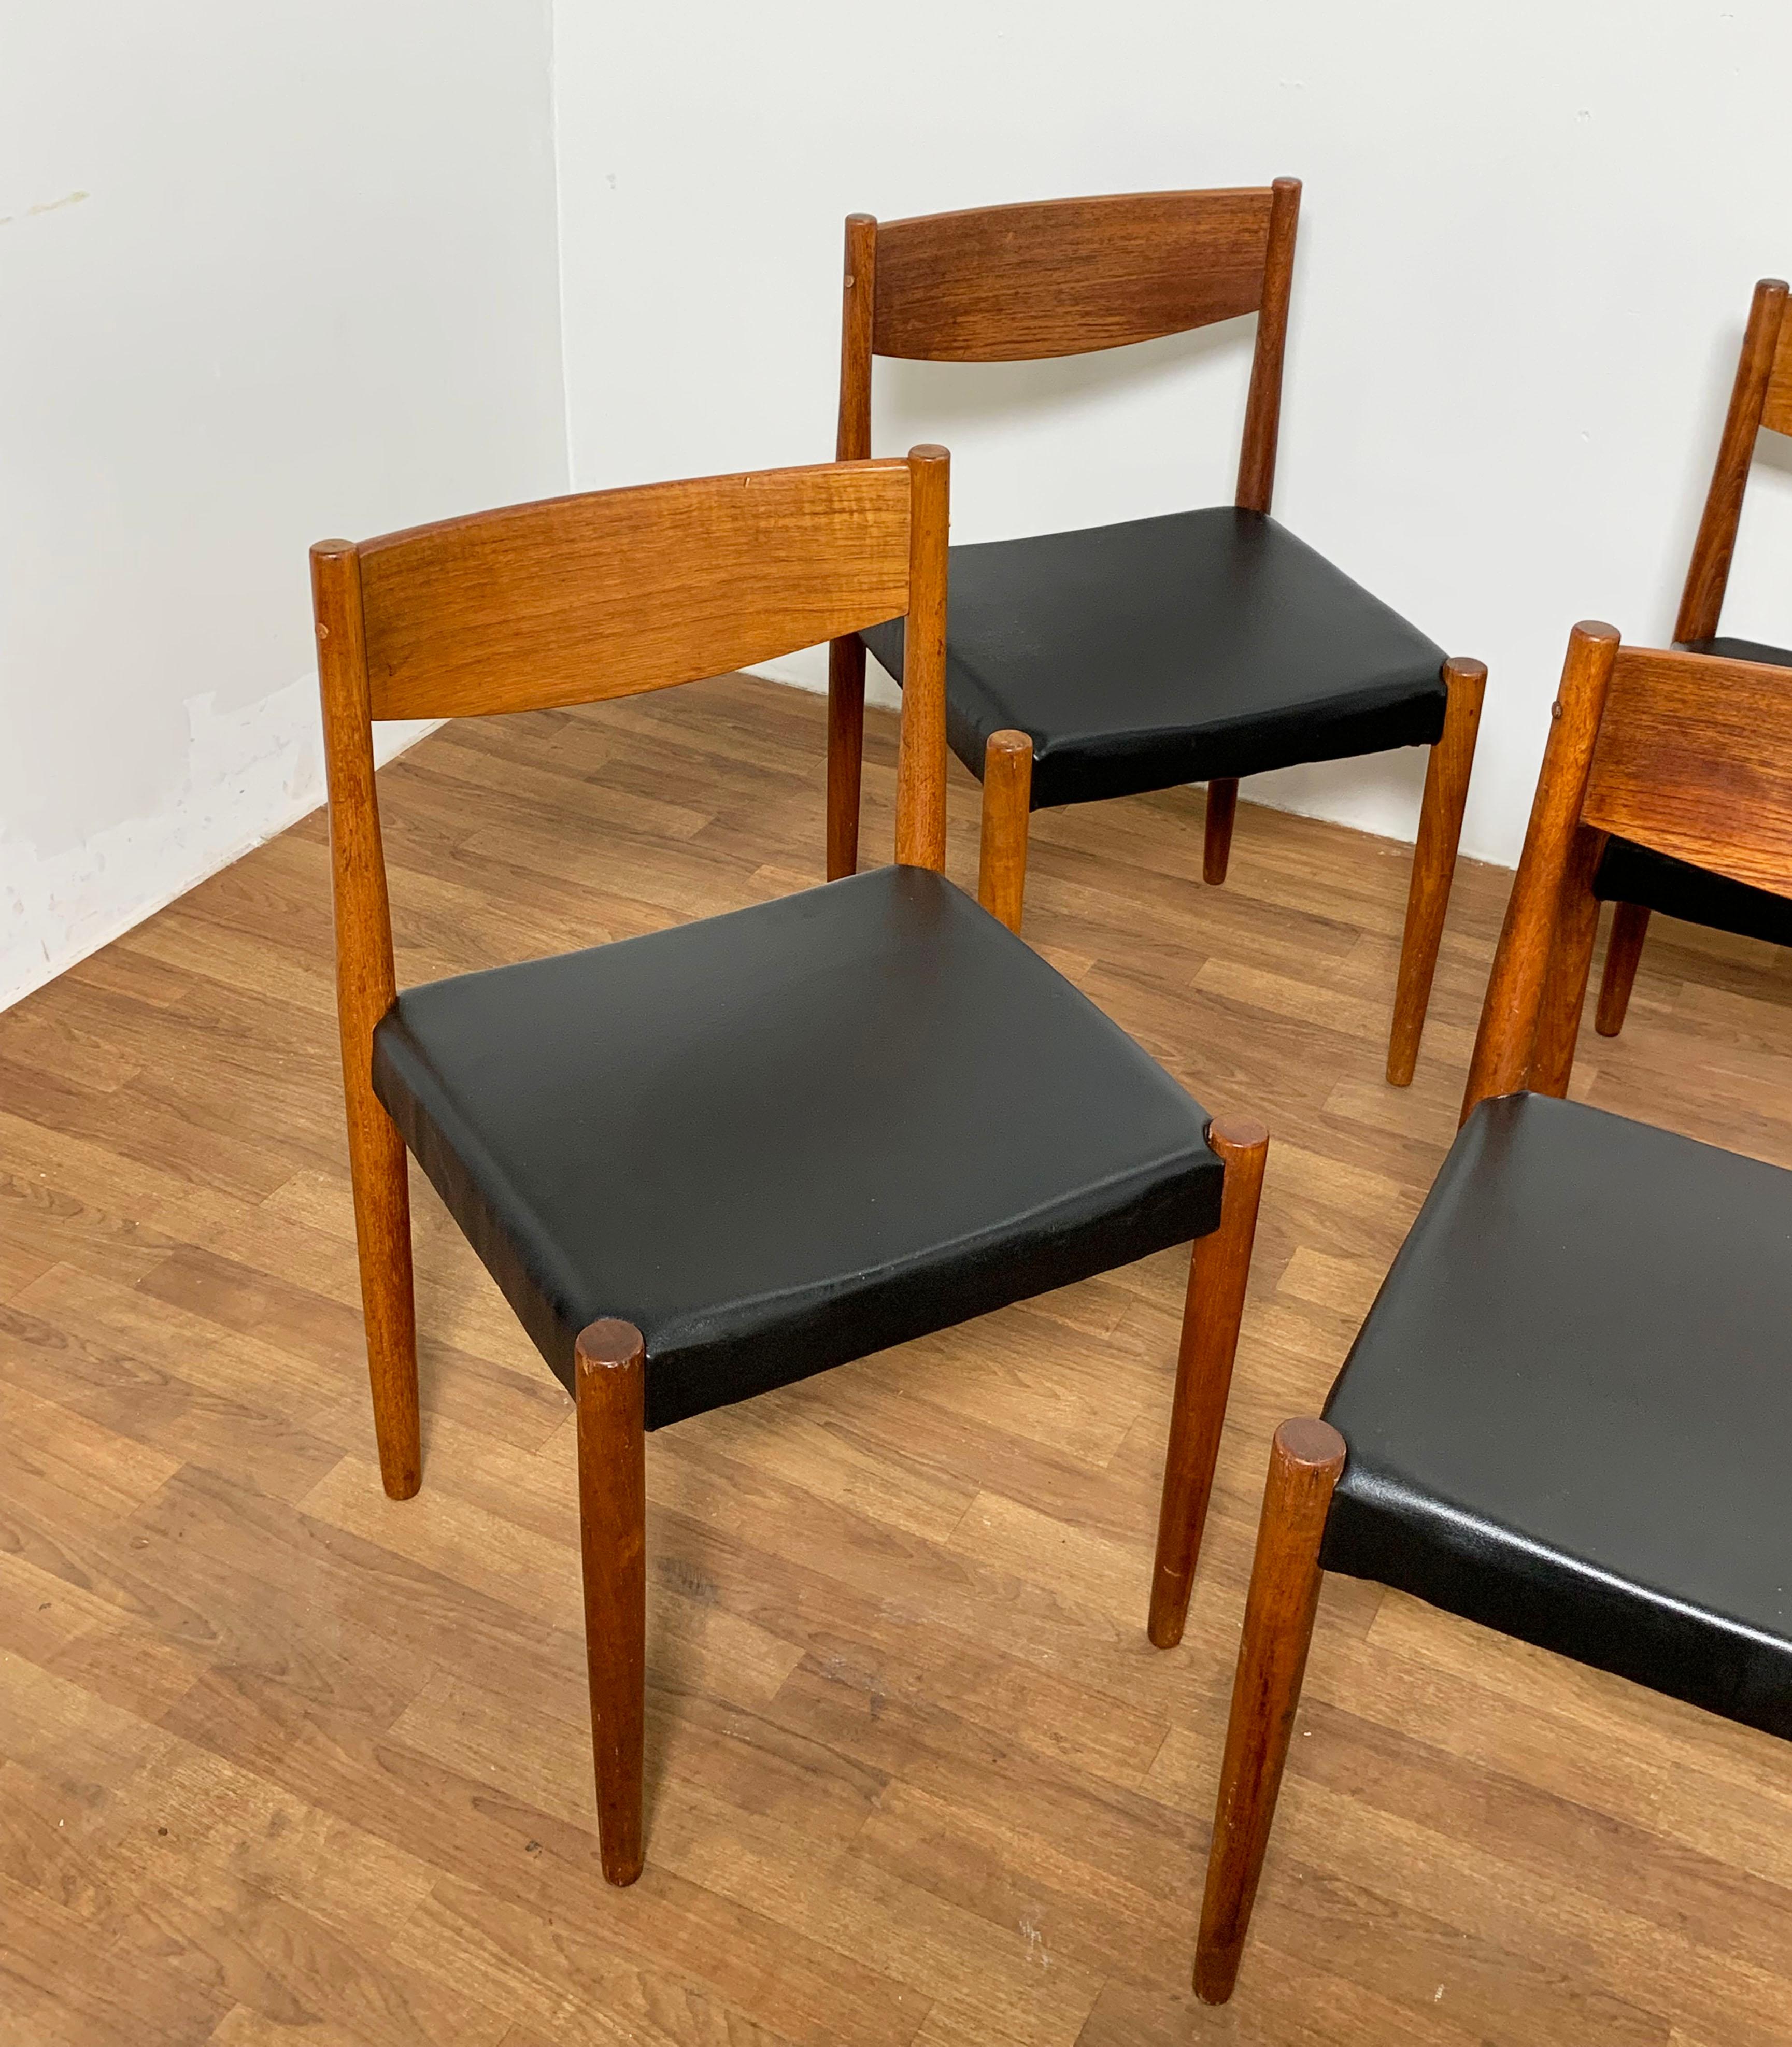 Set of eight teak dining chairs designed by Poul Volther for Frem Rojle, made in Denmark, circa 1960s. A classic Minimalist example of Danish furniture design.